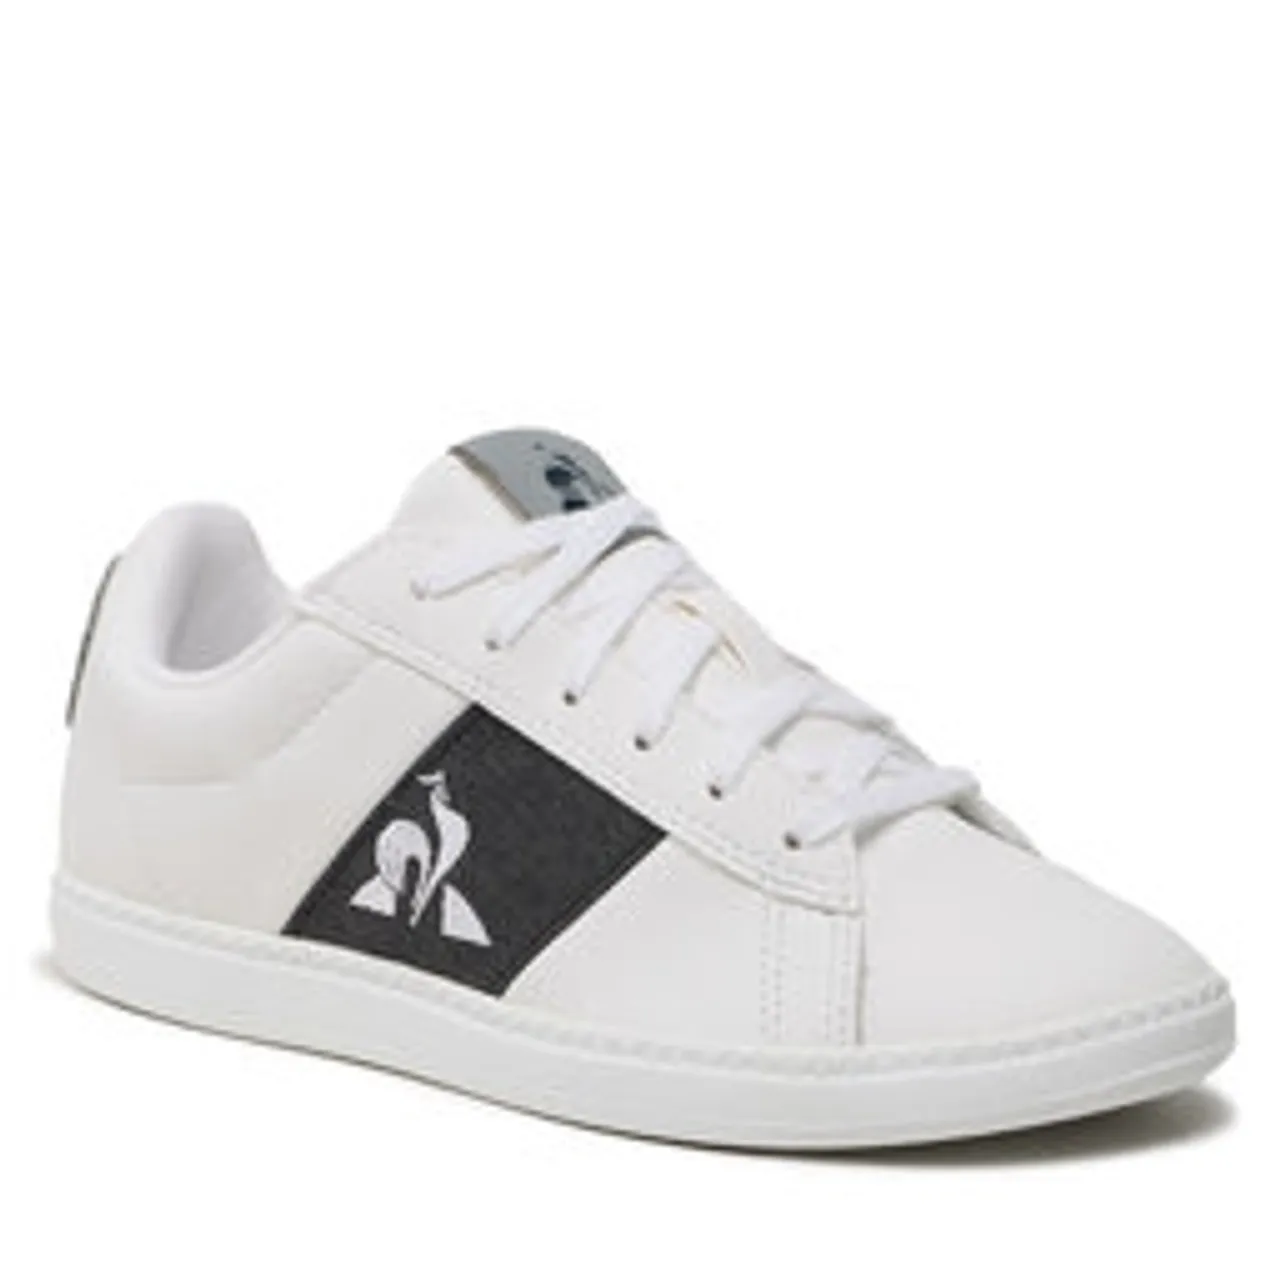 Sneakers Le Coq Sportif Courtclassic Gs 2 Tones 2310242 Optical White